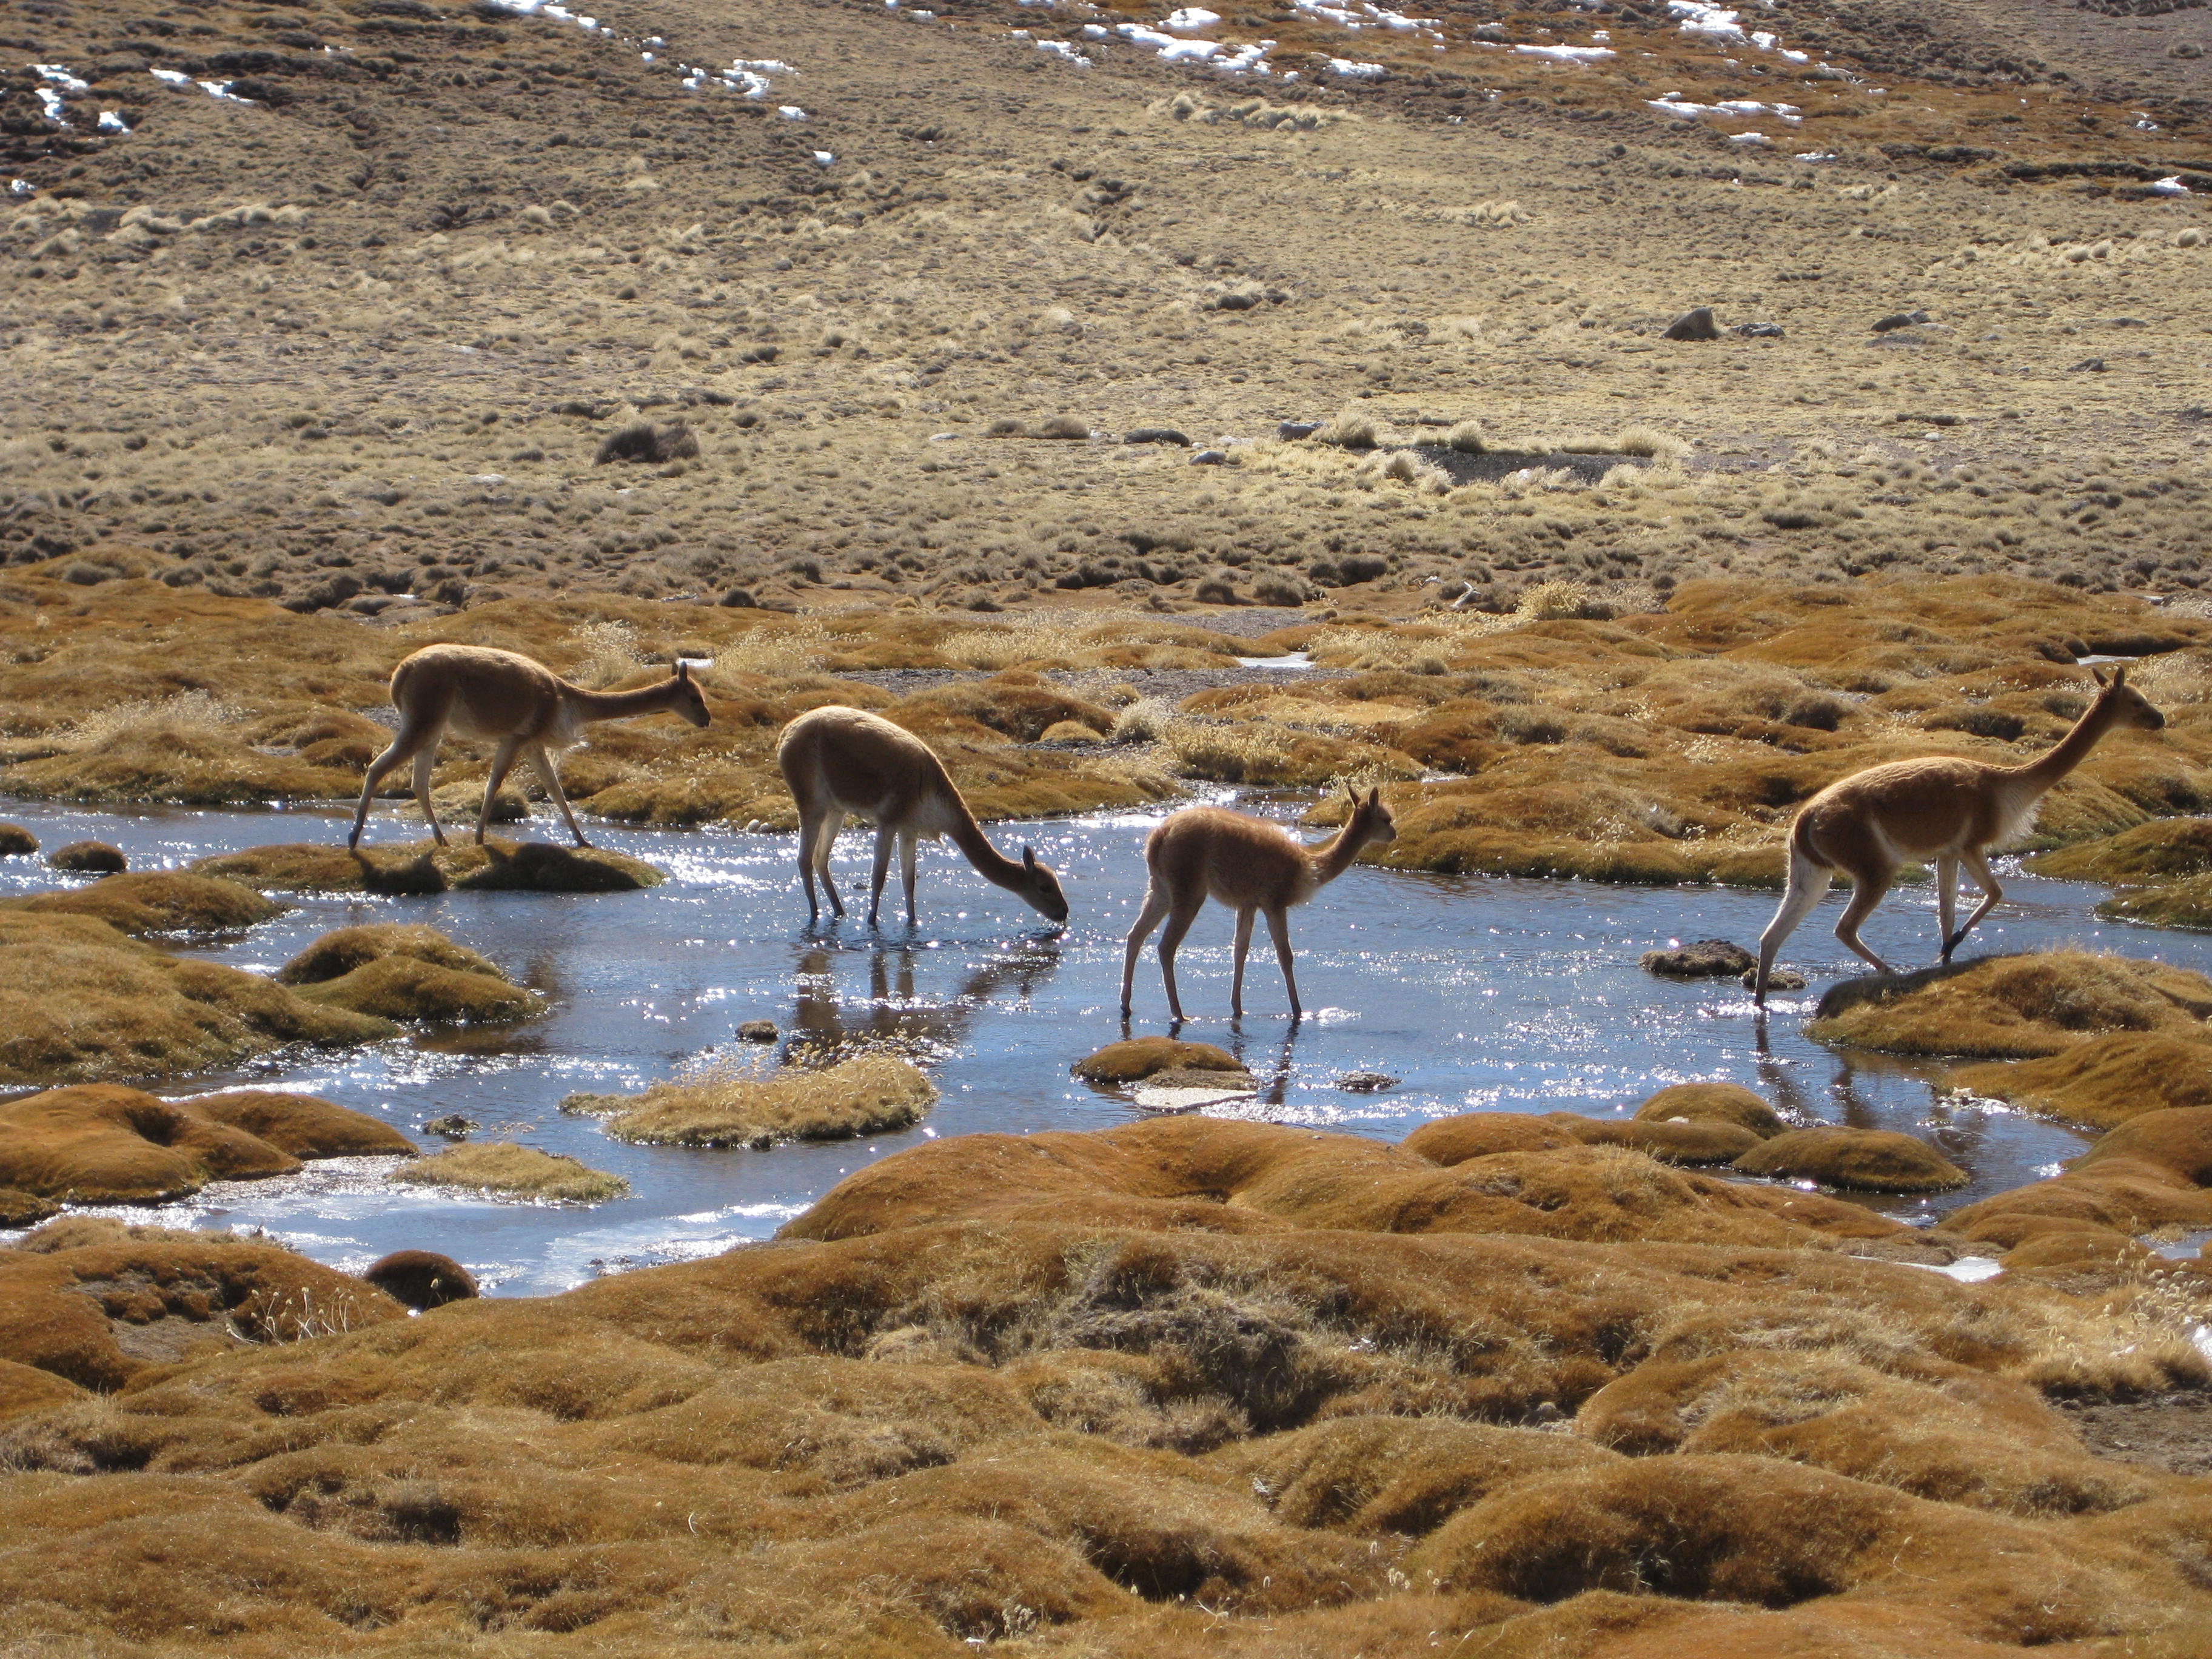 Vicuña drinking from a lake